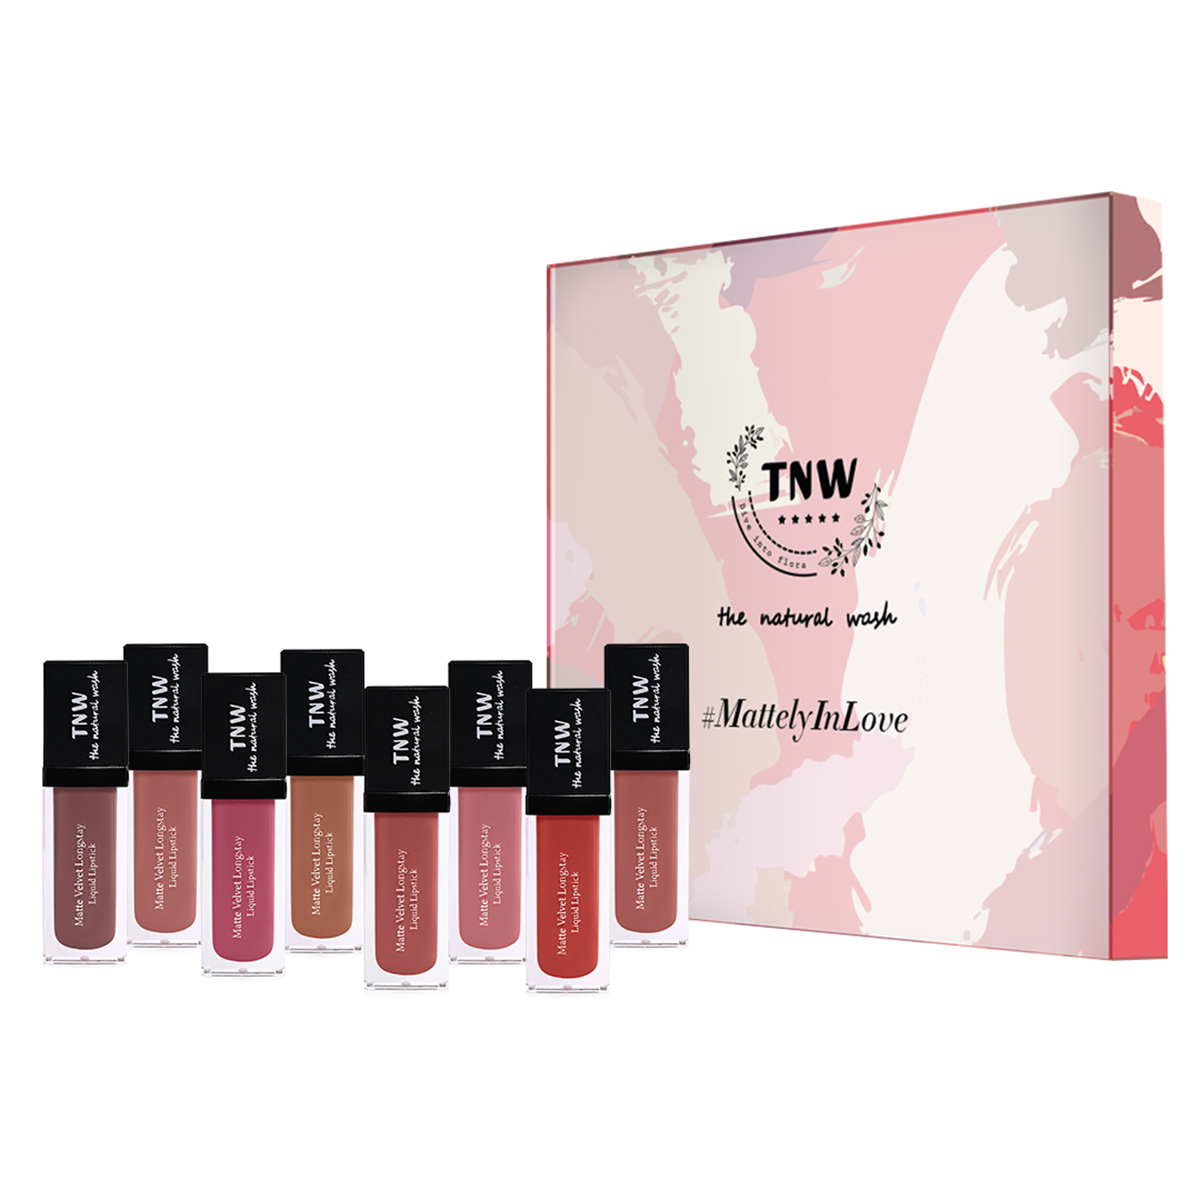 TNW - The Natural Wash Matte Velvet Longstay Liquid Lipstick With Macadamia Oil And Argan Oil - Set Of 8, 5ml Each 